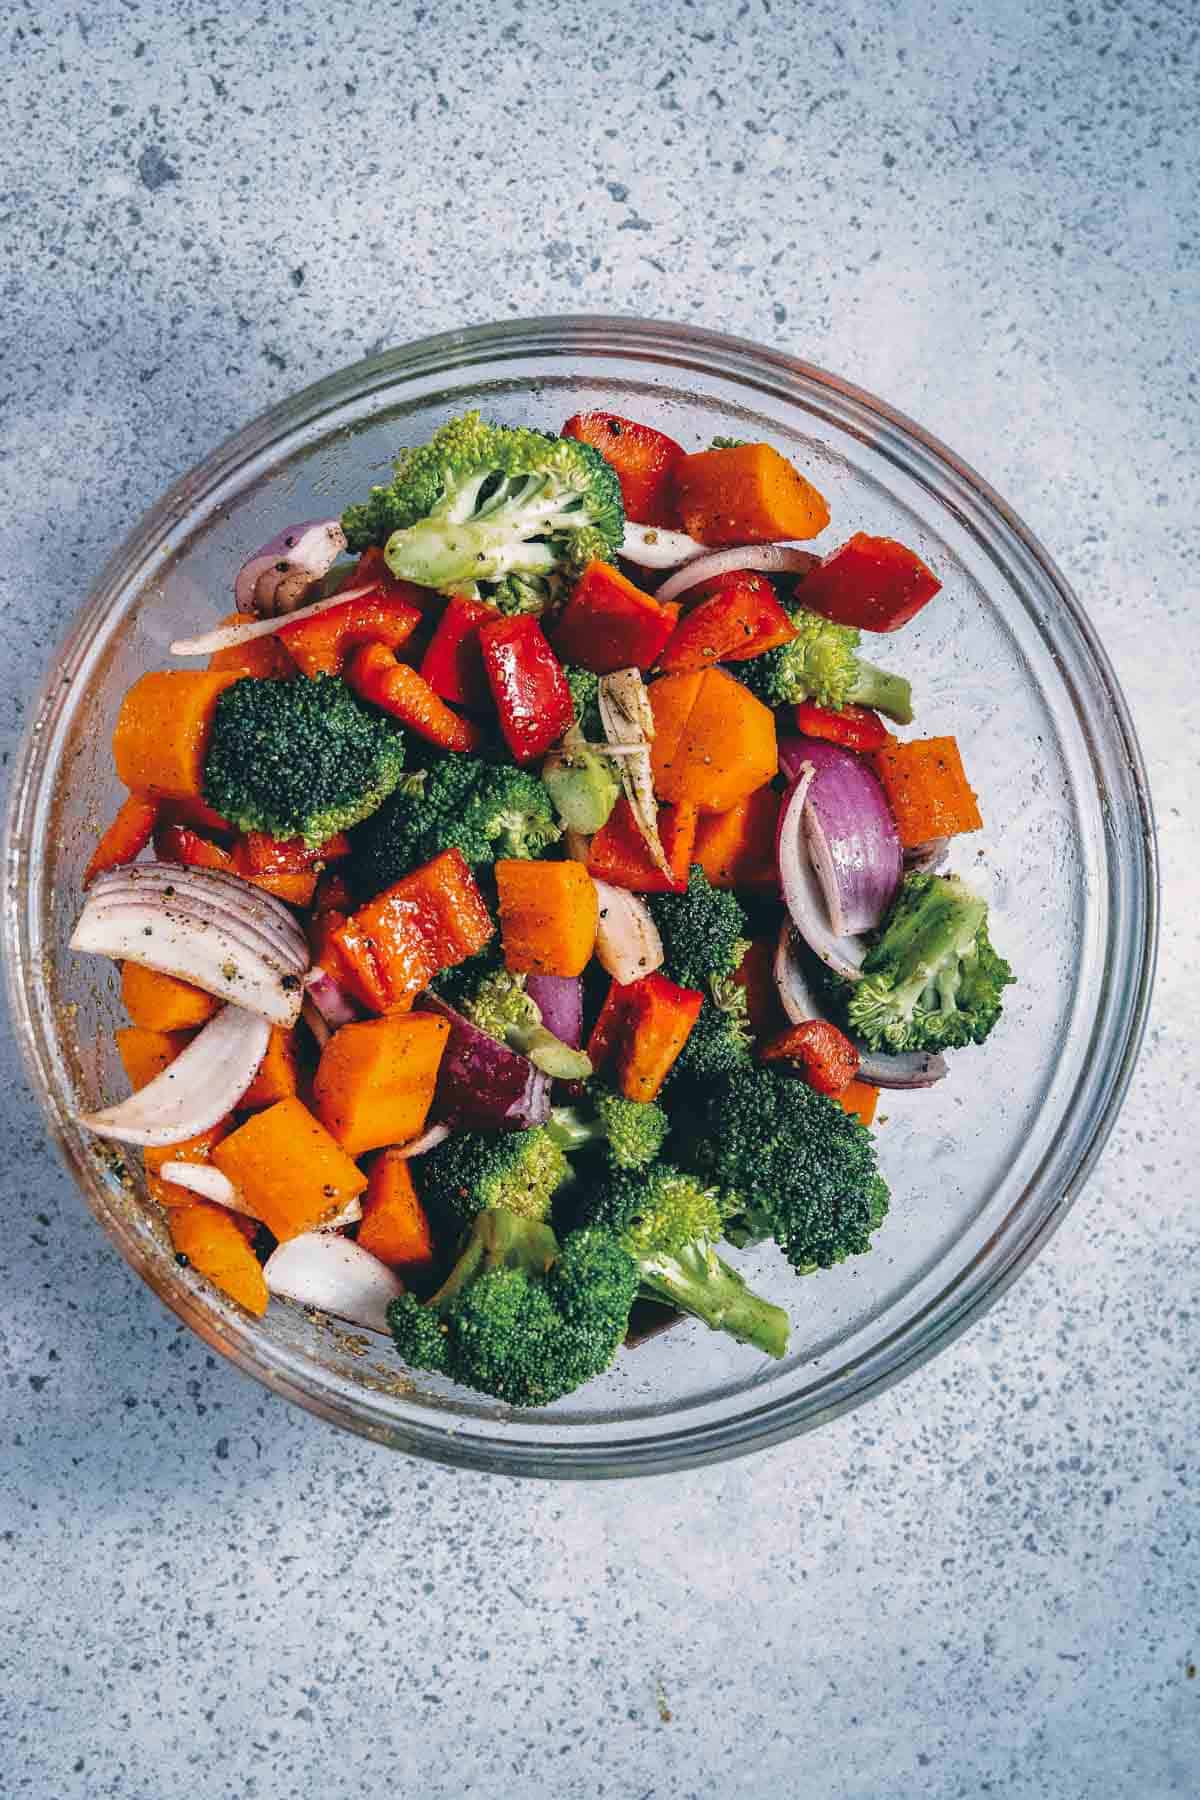 A bowl of vegetables with broccoli, carrots and onions.